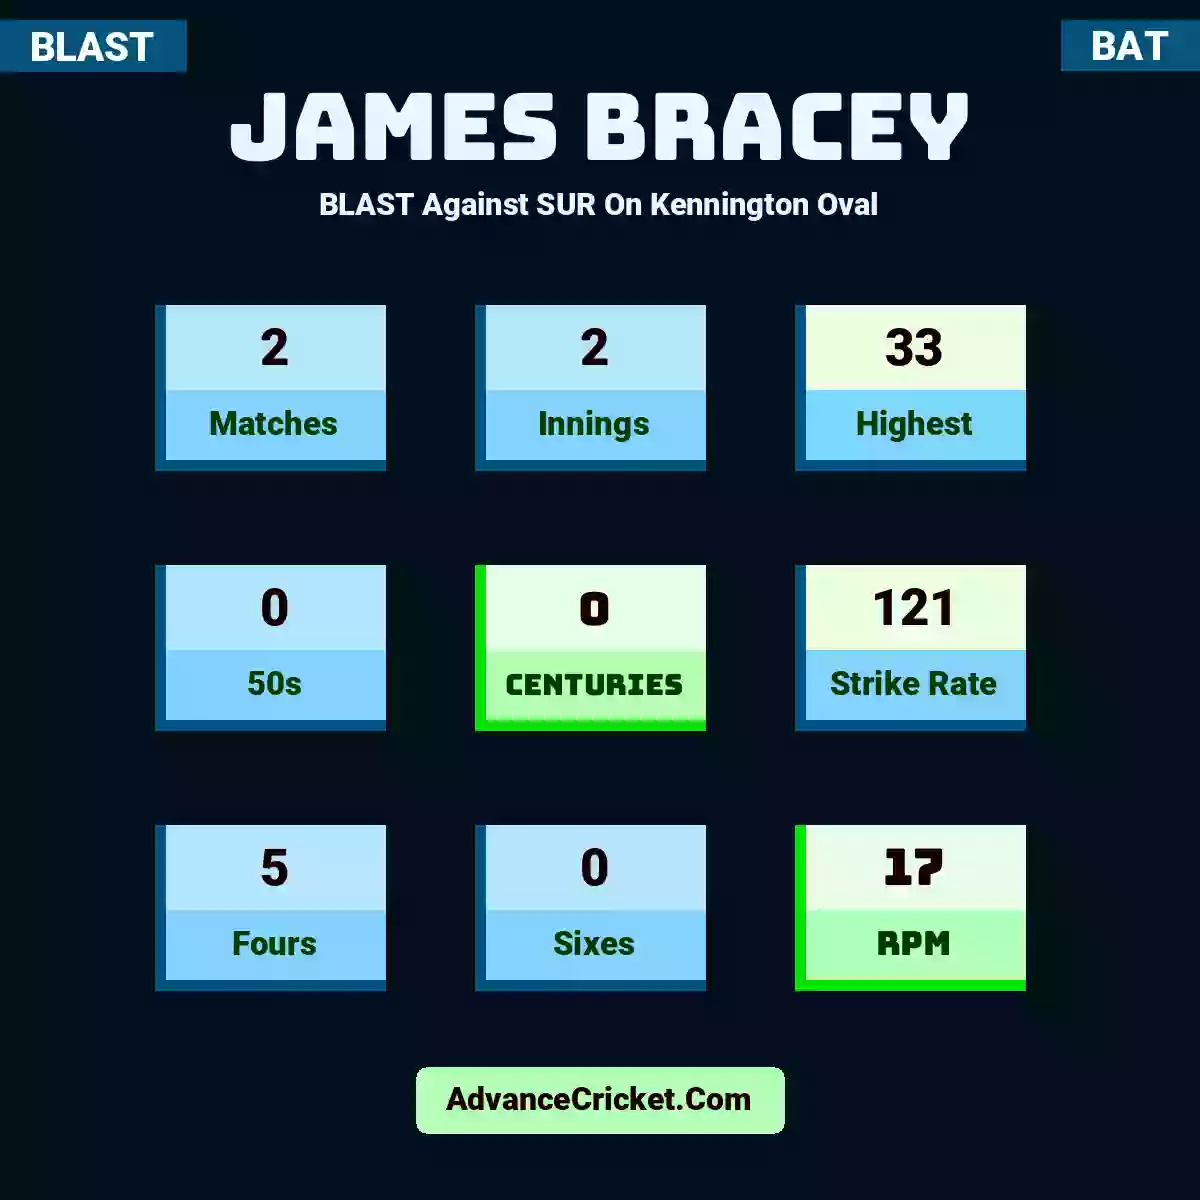 James Bracey BLAST  Against SUR On Kennington Oval, James Bracey played 2 matches, scored 33 runs as highest, 0 half-centuries, and 0 centuries, with a strike rate of 121. J.Bracey hit 5 fours and 0 sixes, with an RPM of 17.